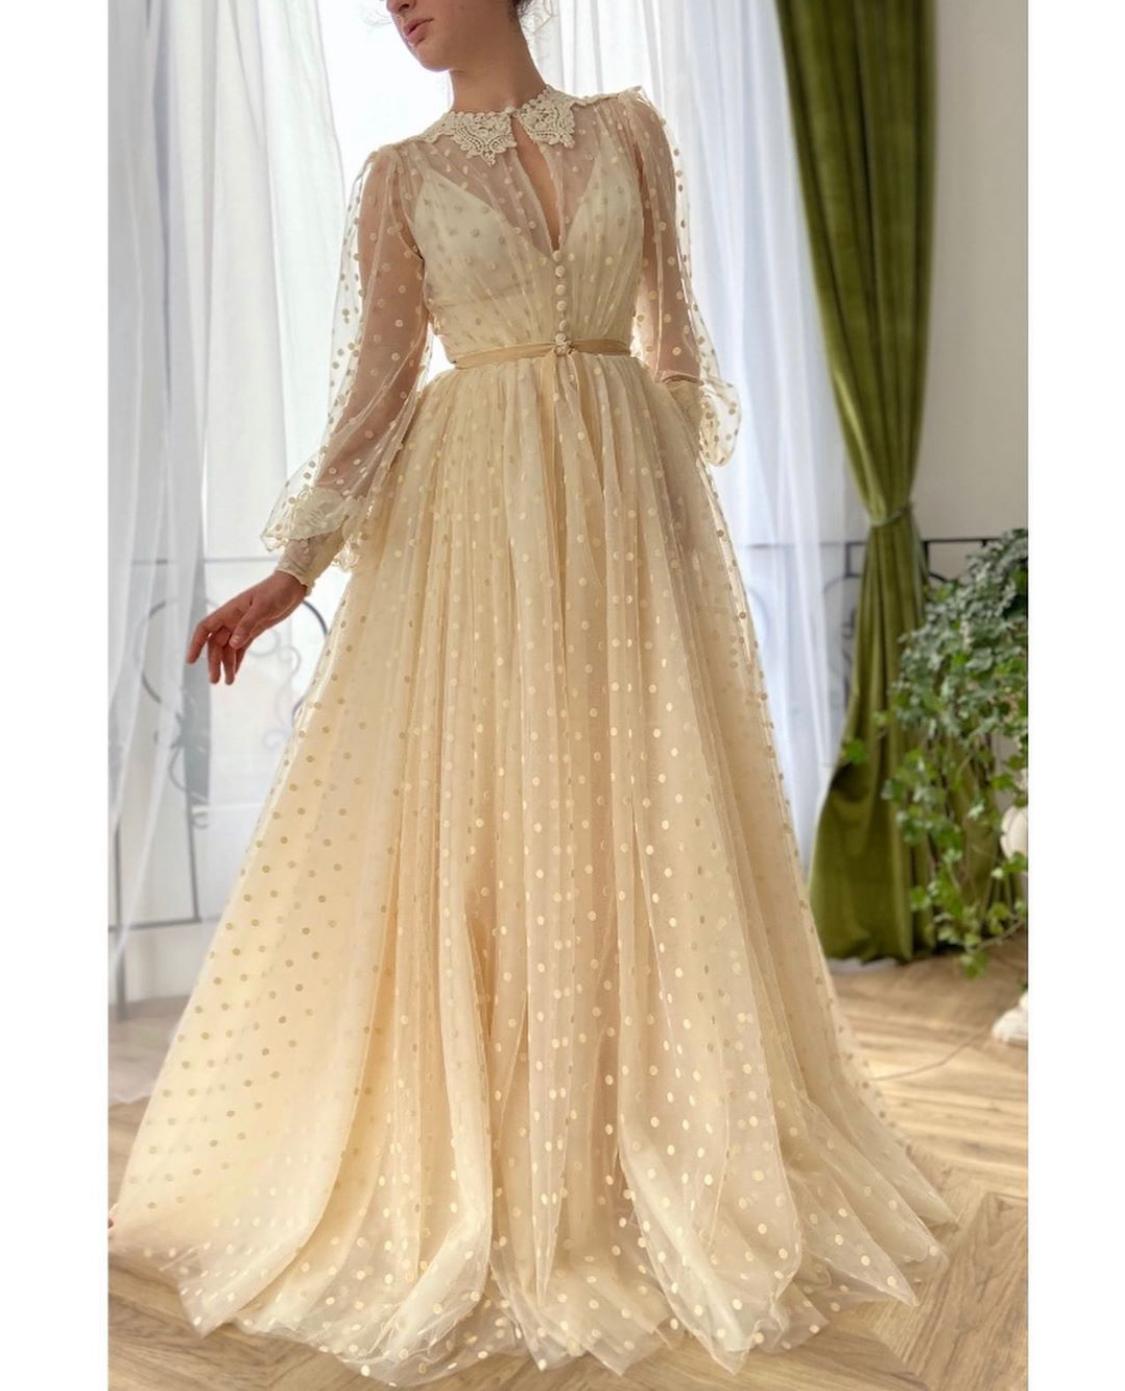 Beige A-Line dotted dress with embroidery and long sleeves